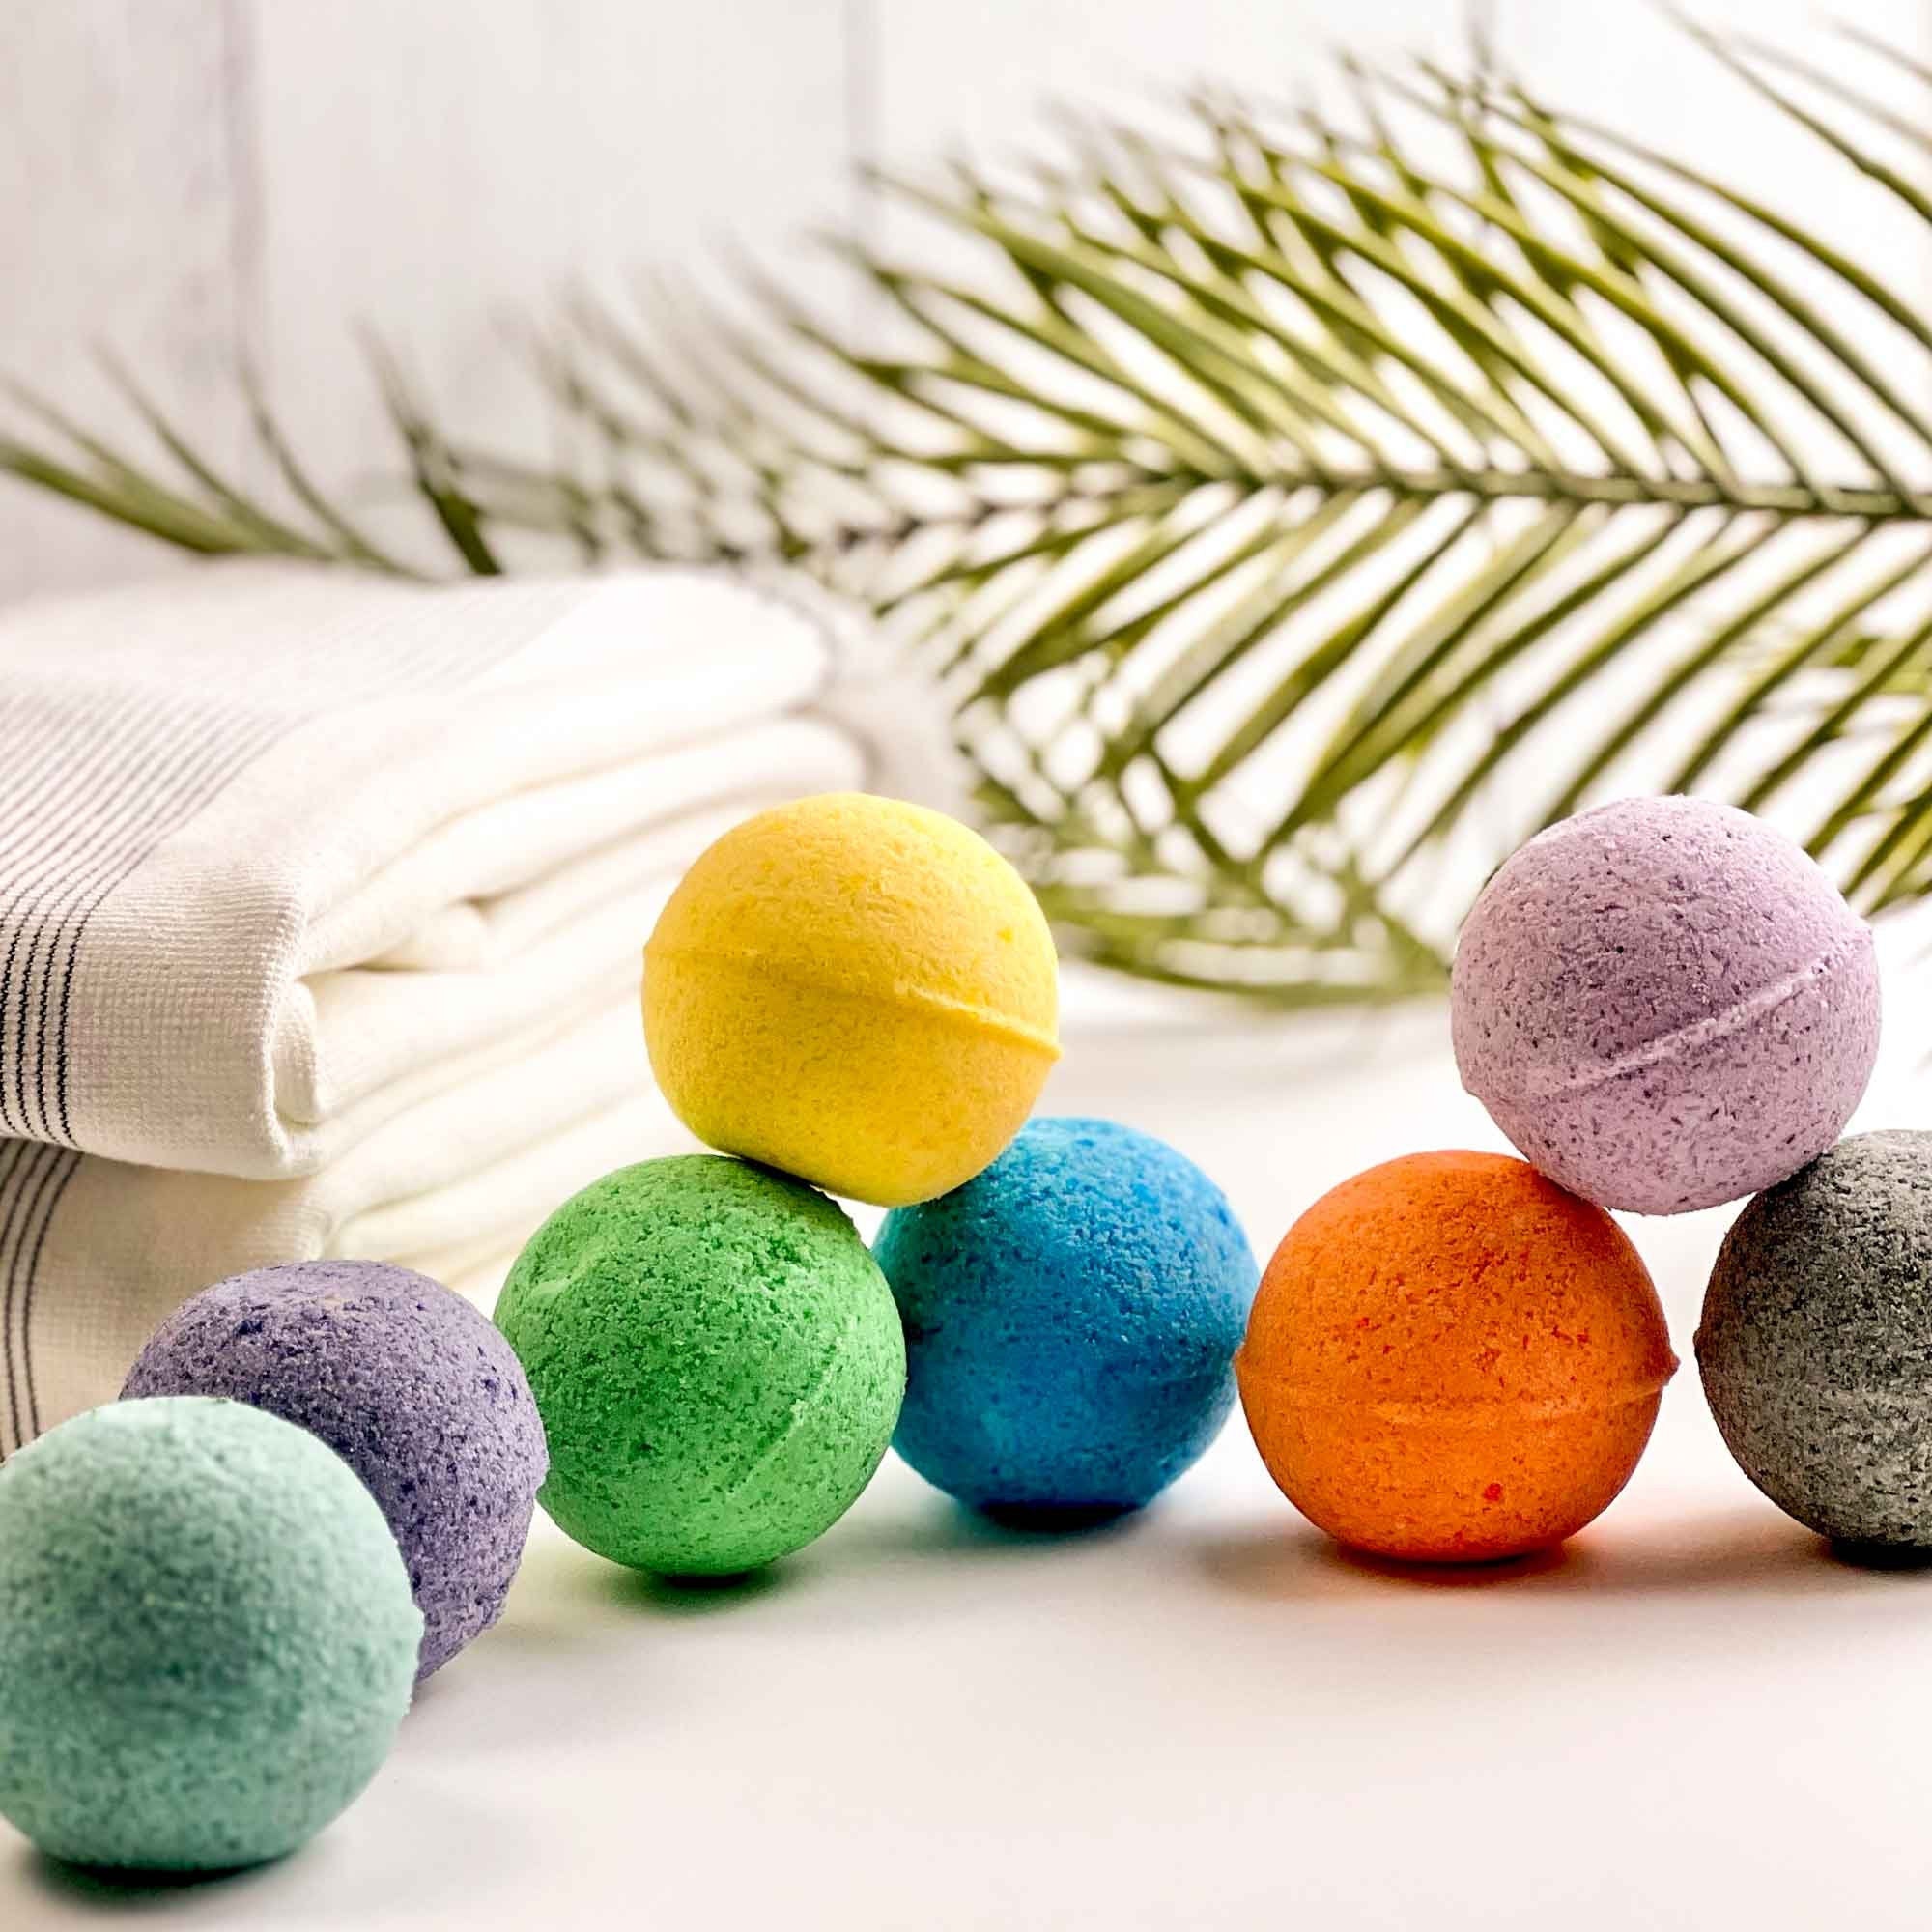 Experience the Refreshing and Soothing Power of Sea Mist Bath Bombs - Handmade with All-Natural Ingredients for a Luxurious Bath